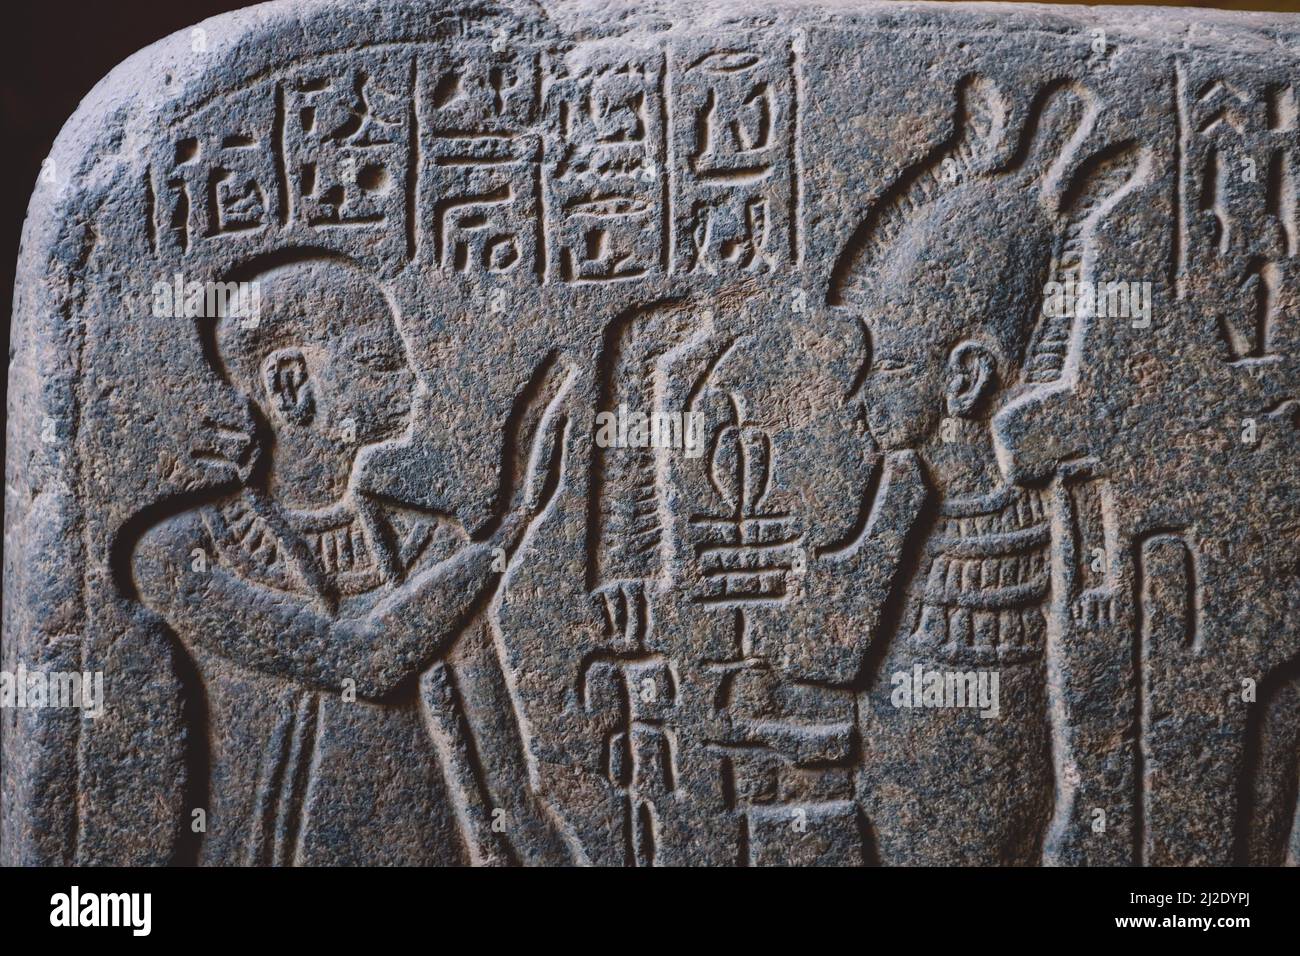 Interesting Ancient Paintings and Engravings with Hieroglyphics symbols in the Cairo Egyptian Museum, the oldest archaeological museum in the Middle E Stock Photo